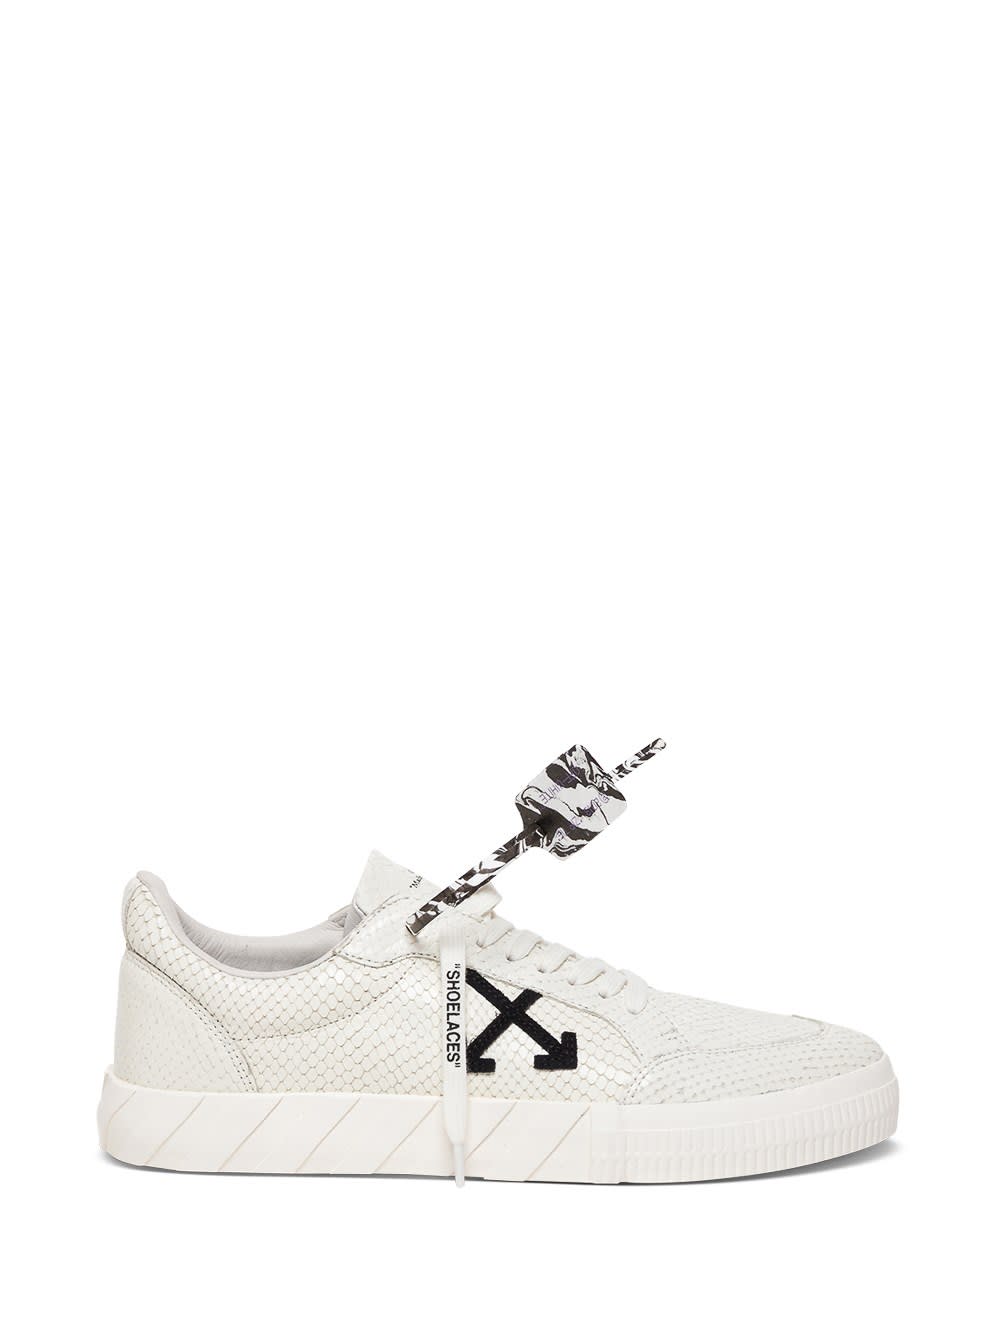 OFF-WHITE LOW VULCANIZED SNEAKERS IN WHITE LEATHER,OMIA085S21LEA0030110